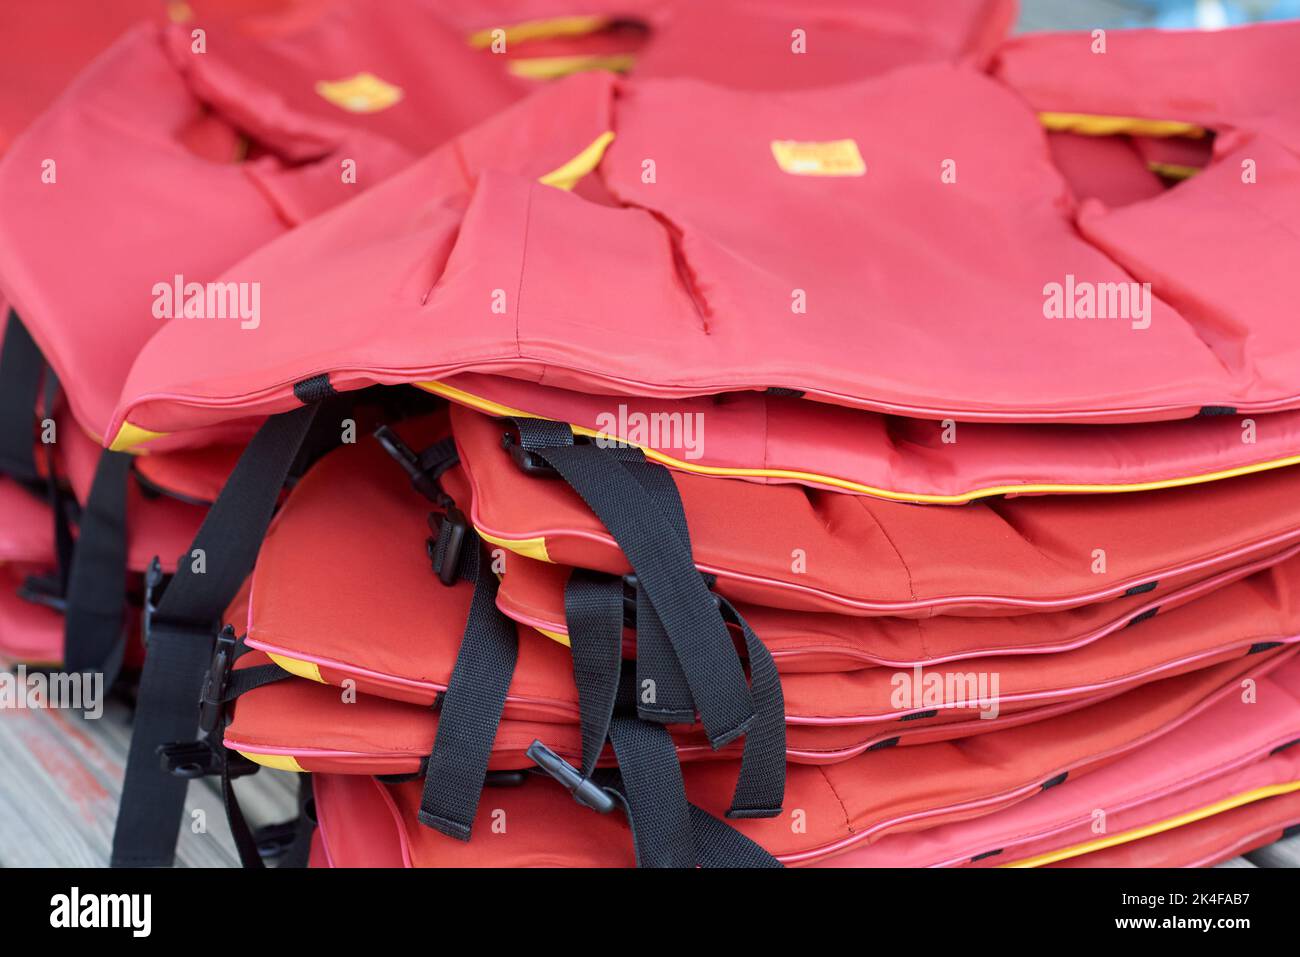 A stack of red life jackets Stock Photo